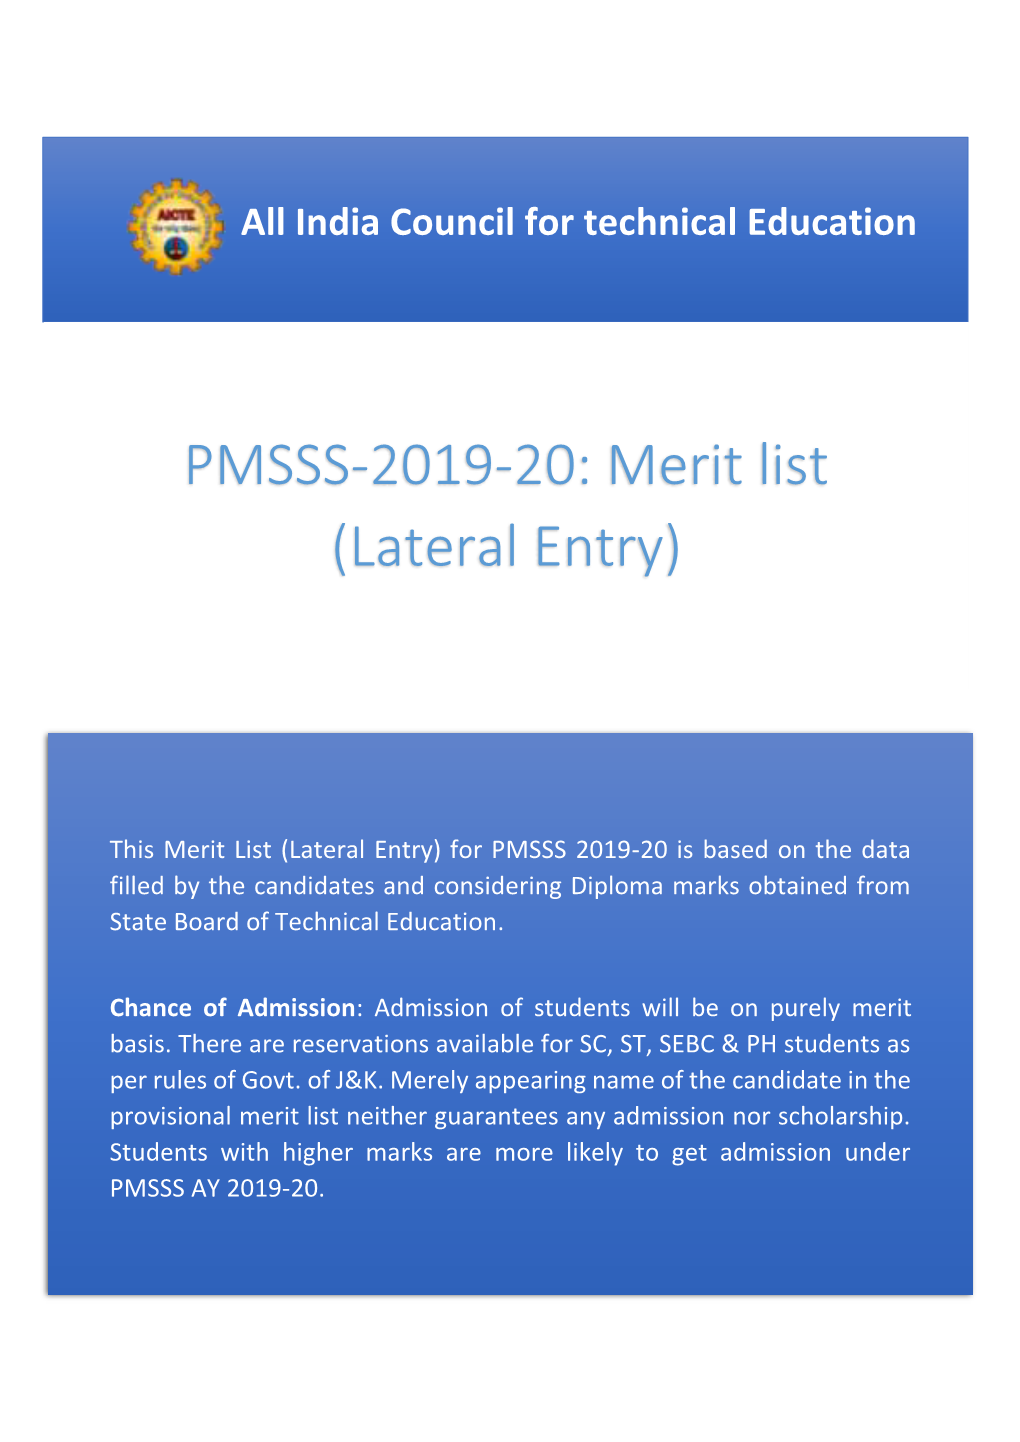 PMSSS-2019-20: Merit List (Lateral Entry)